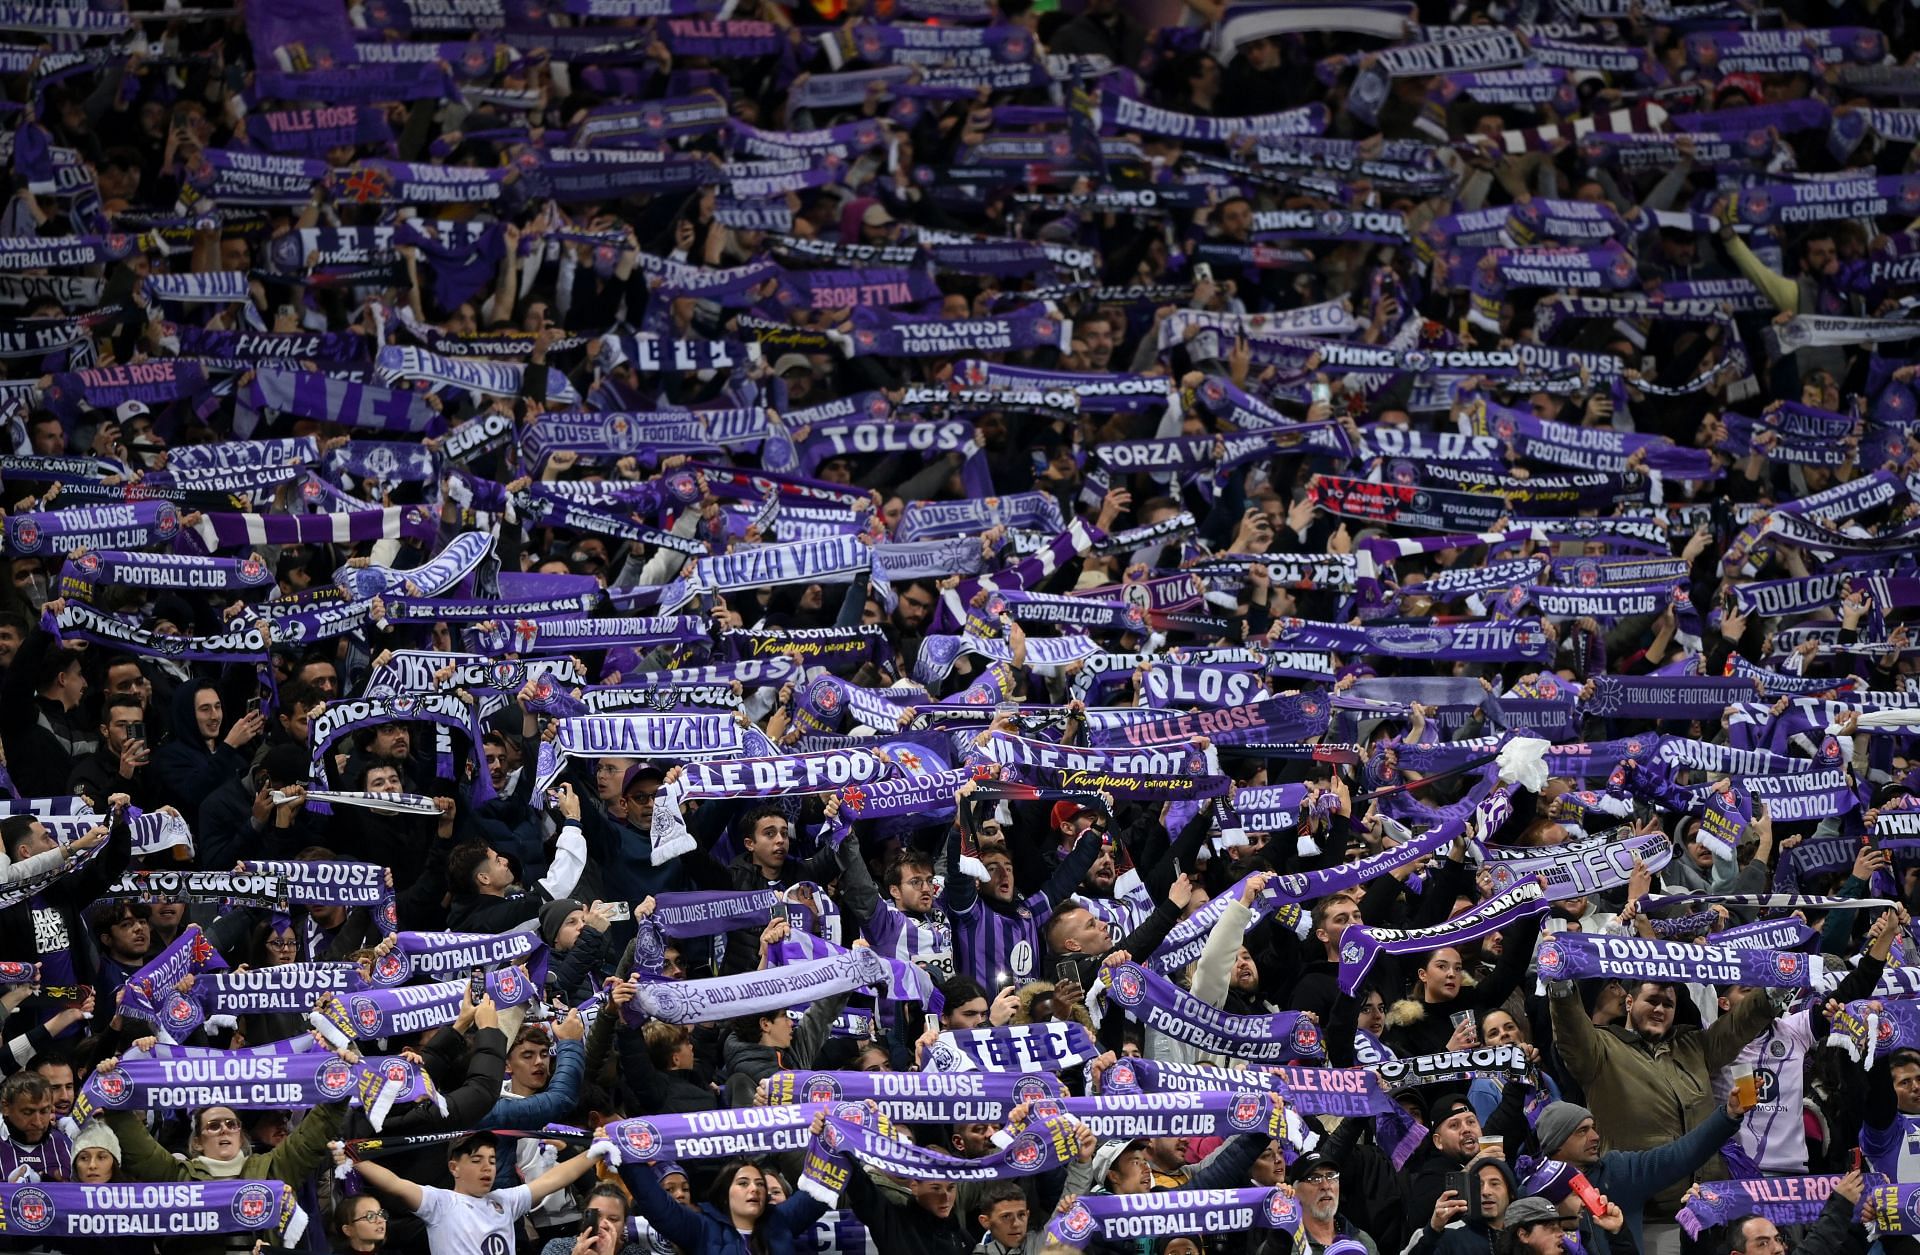 Toulouse FC confirm RedBird Capital takeover - SportsPro